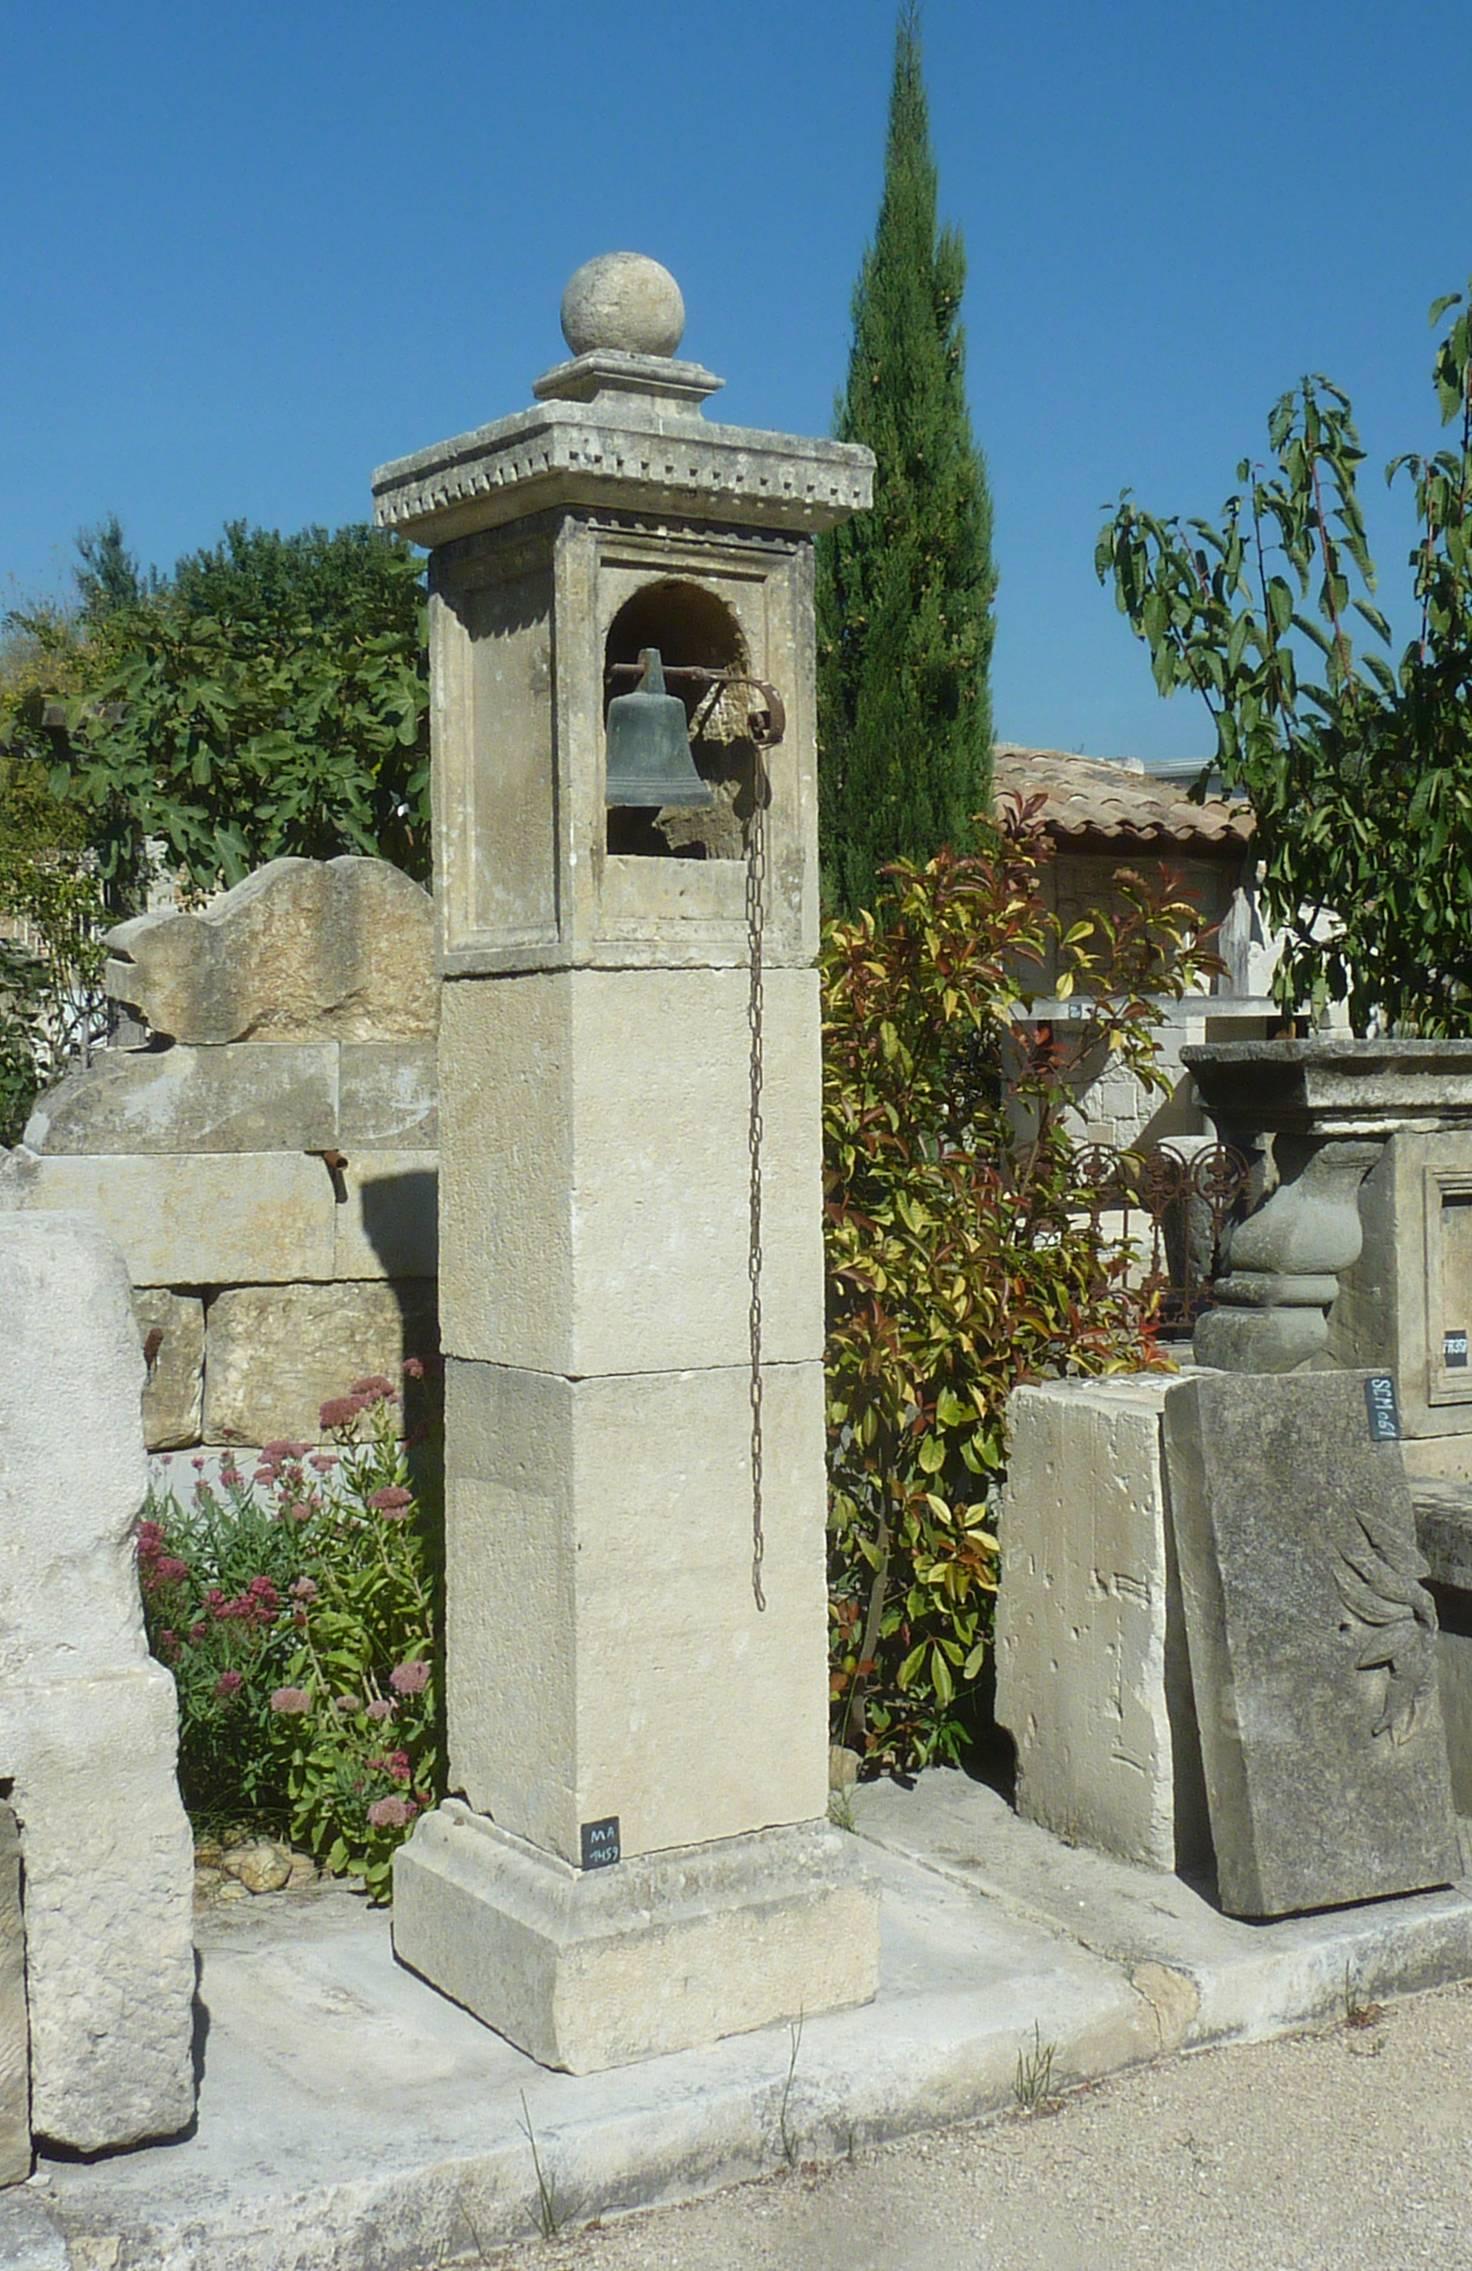 This magnificent ancient pillar has been crafted in the 19th century in natural French limestone. The stone shows now a beautiful patina and wear and tear of time.

This one of the kindbell pillarl is composed of a thick molded monolithic base, of